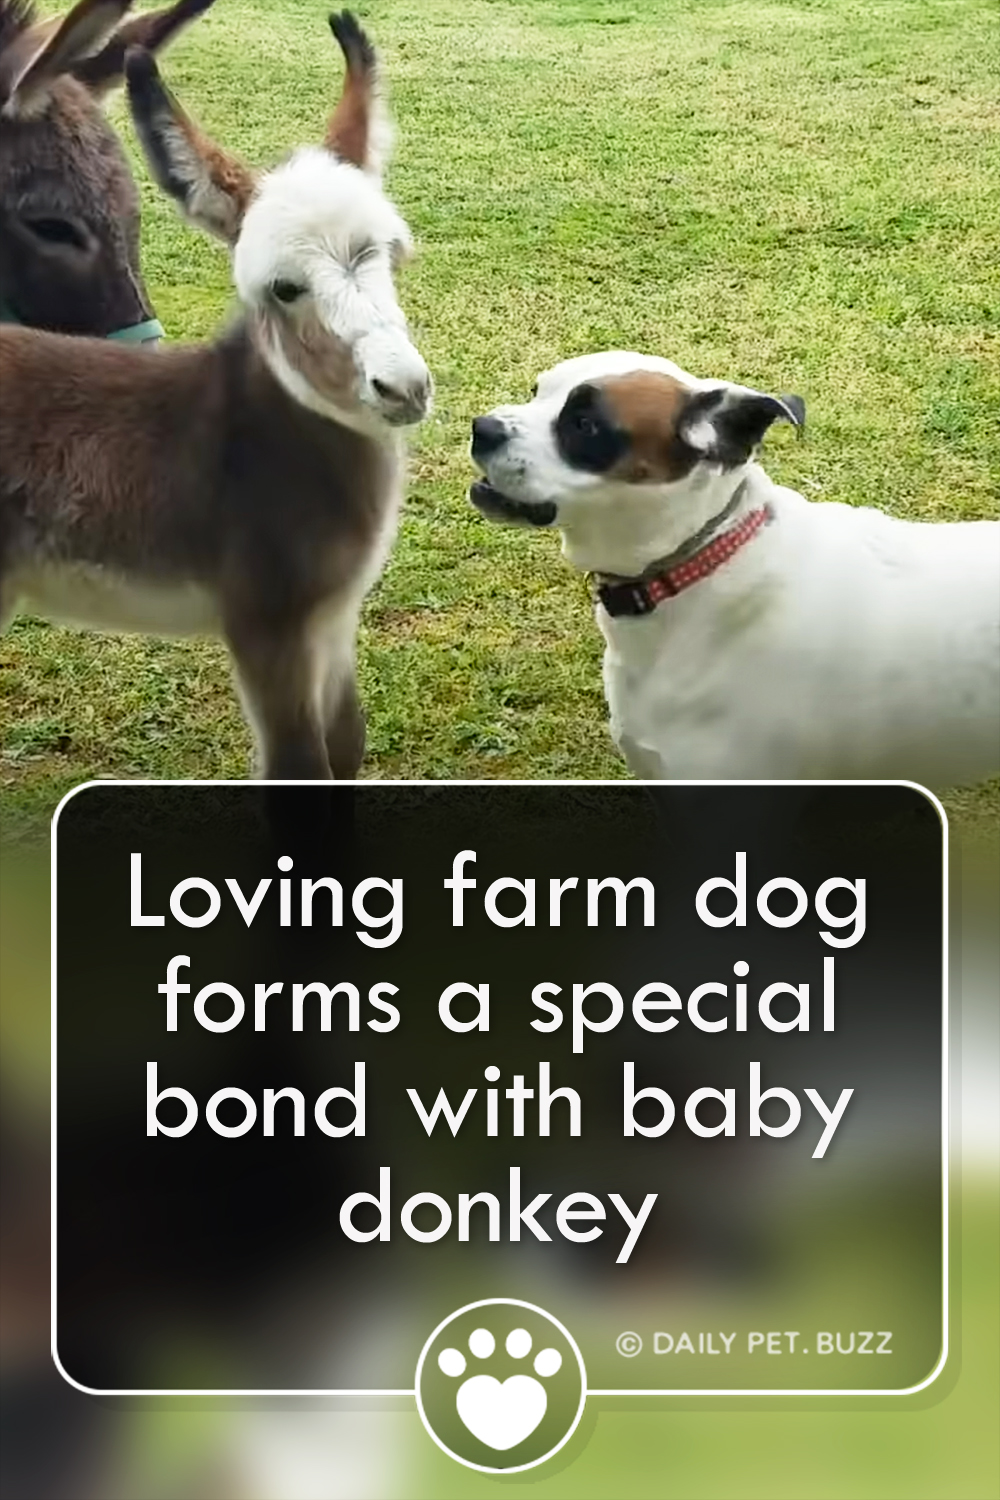 Loving farm dog forms a special bond with baby donkey